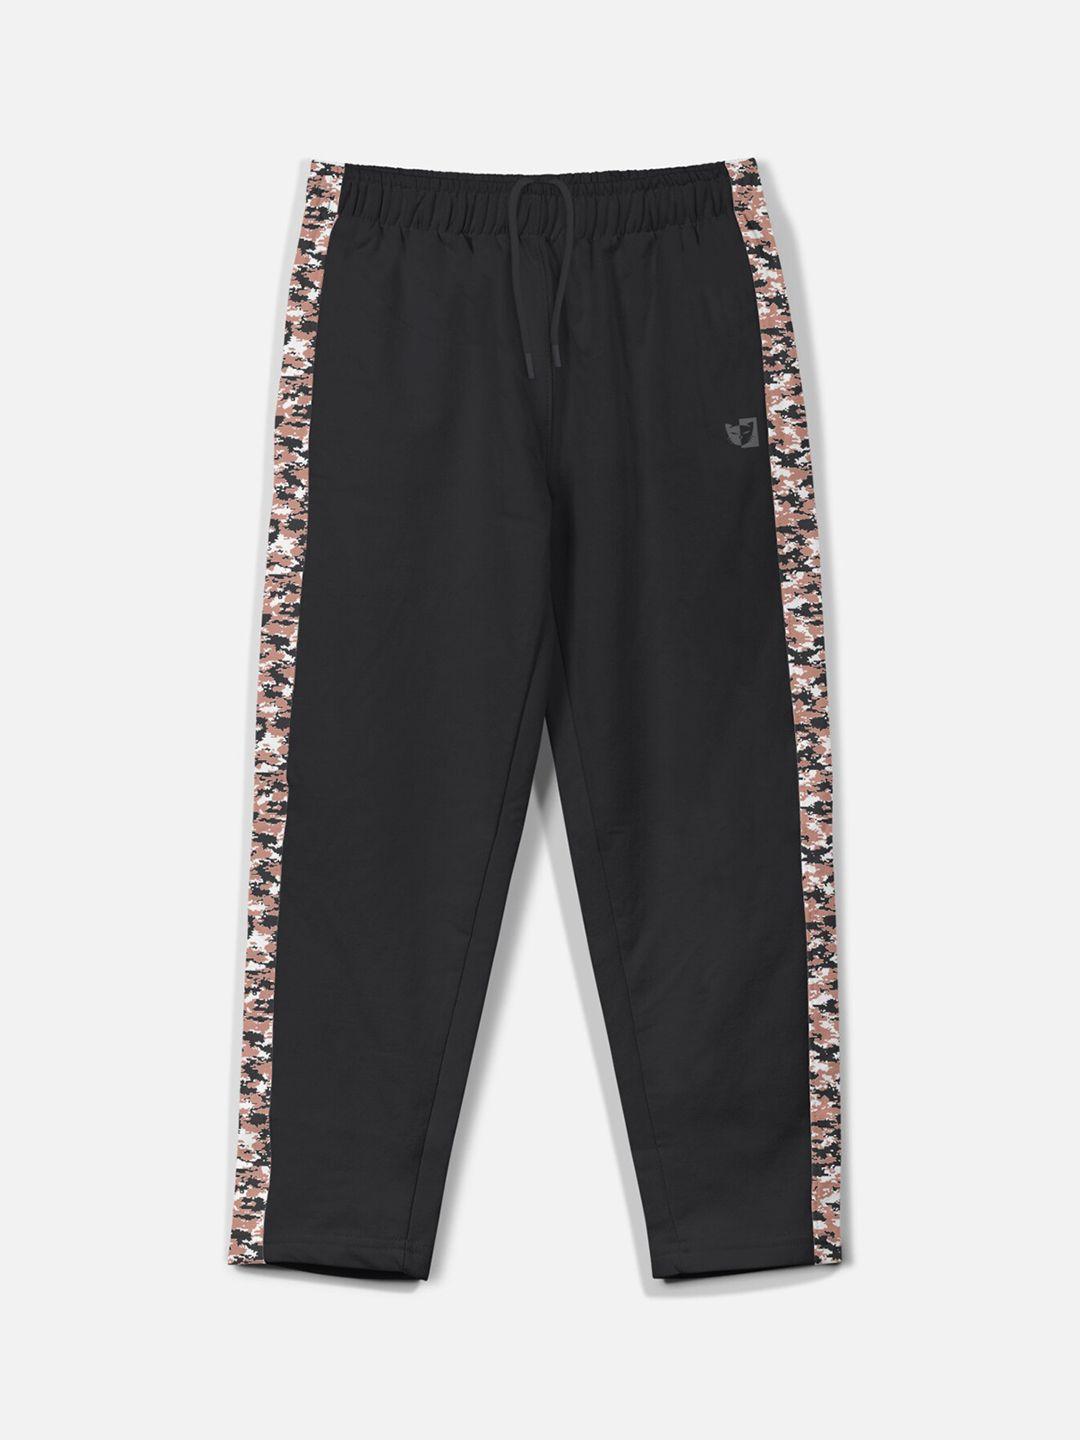 hellcat-boys-mid-rise-camouflage-printed-track-pants